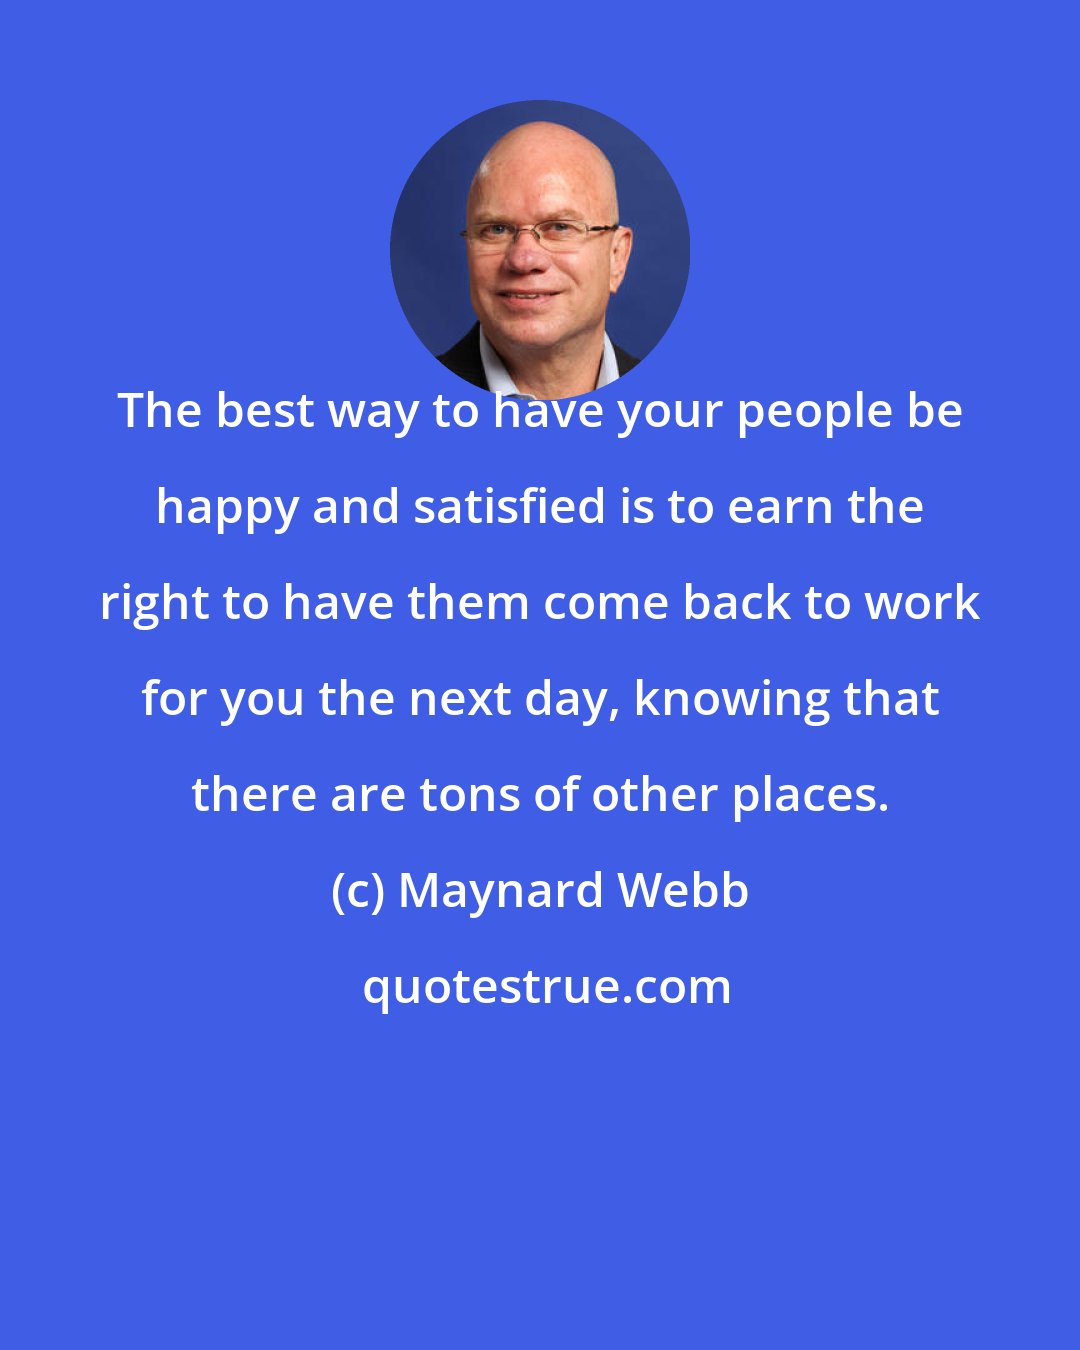 Maynard Webb: The best way to have your people be happy and satisfied is to earn the right to have them come back to work for you the next day, knowing that there are tons of other places.